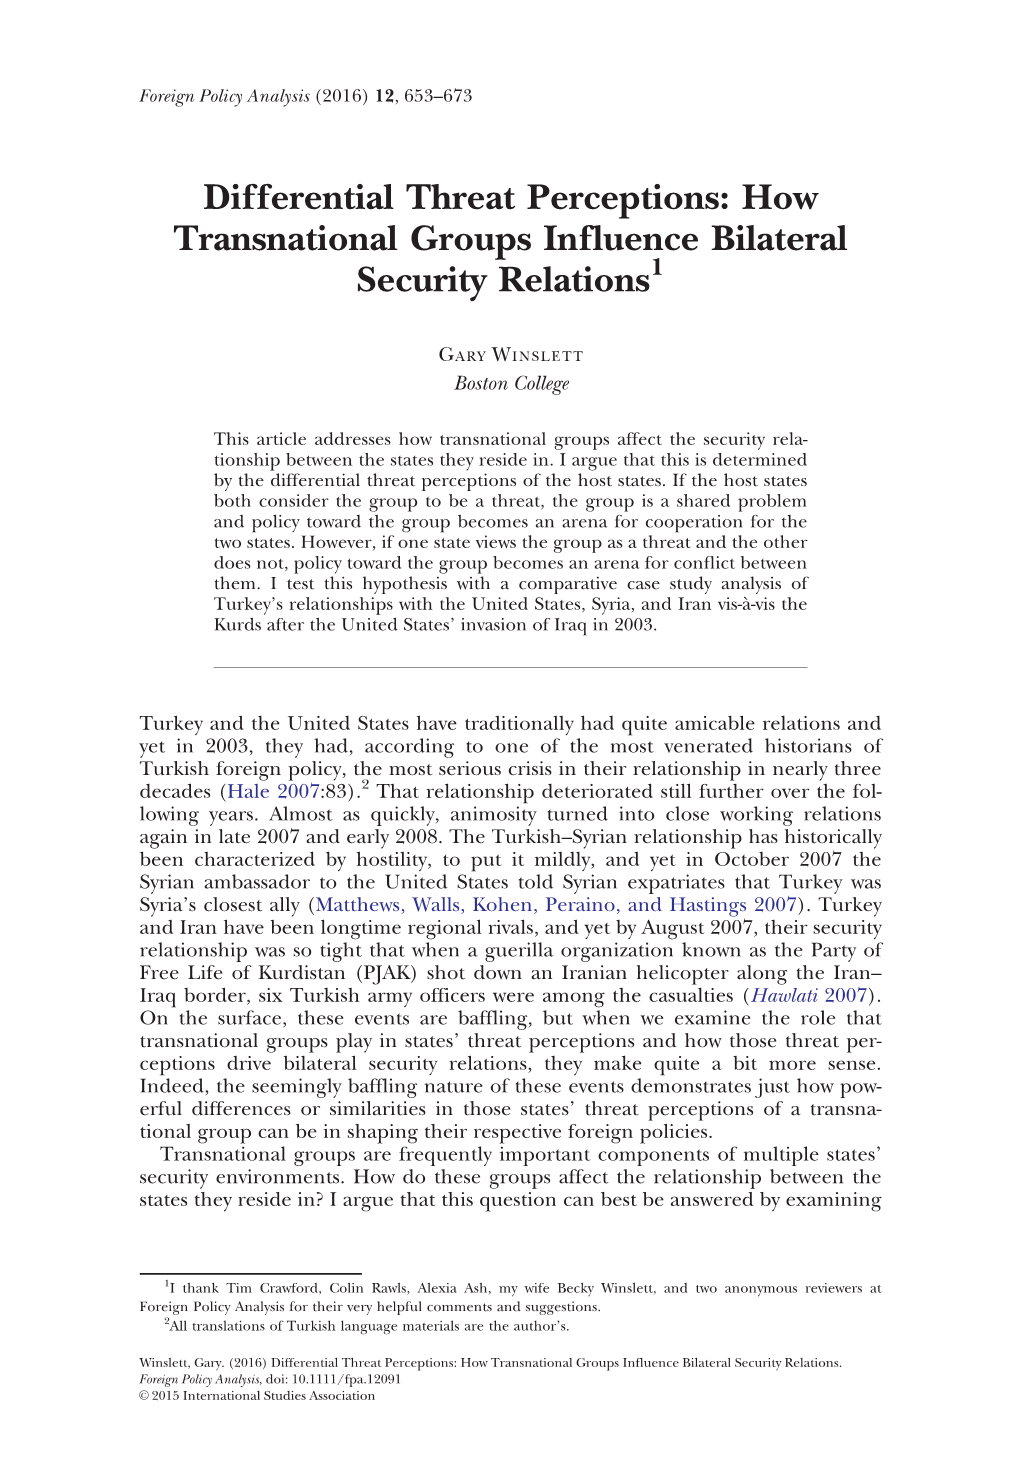 Differential Threat Perceptions: How Transnational Groups Influence Bilateral Security Relations1